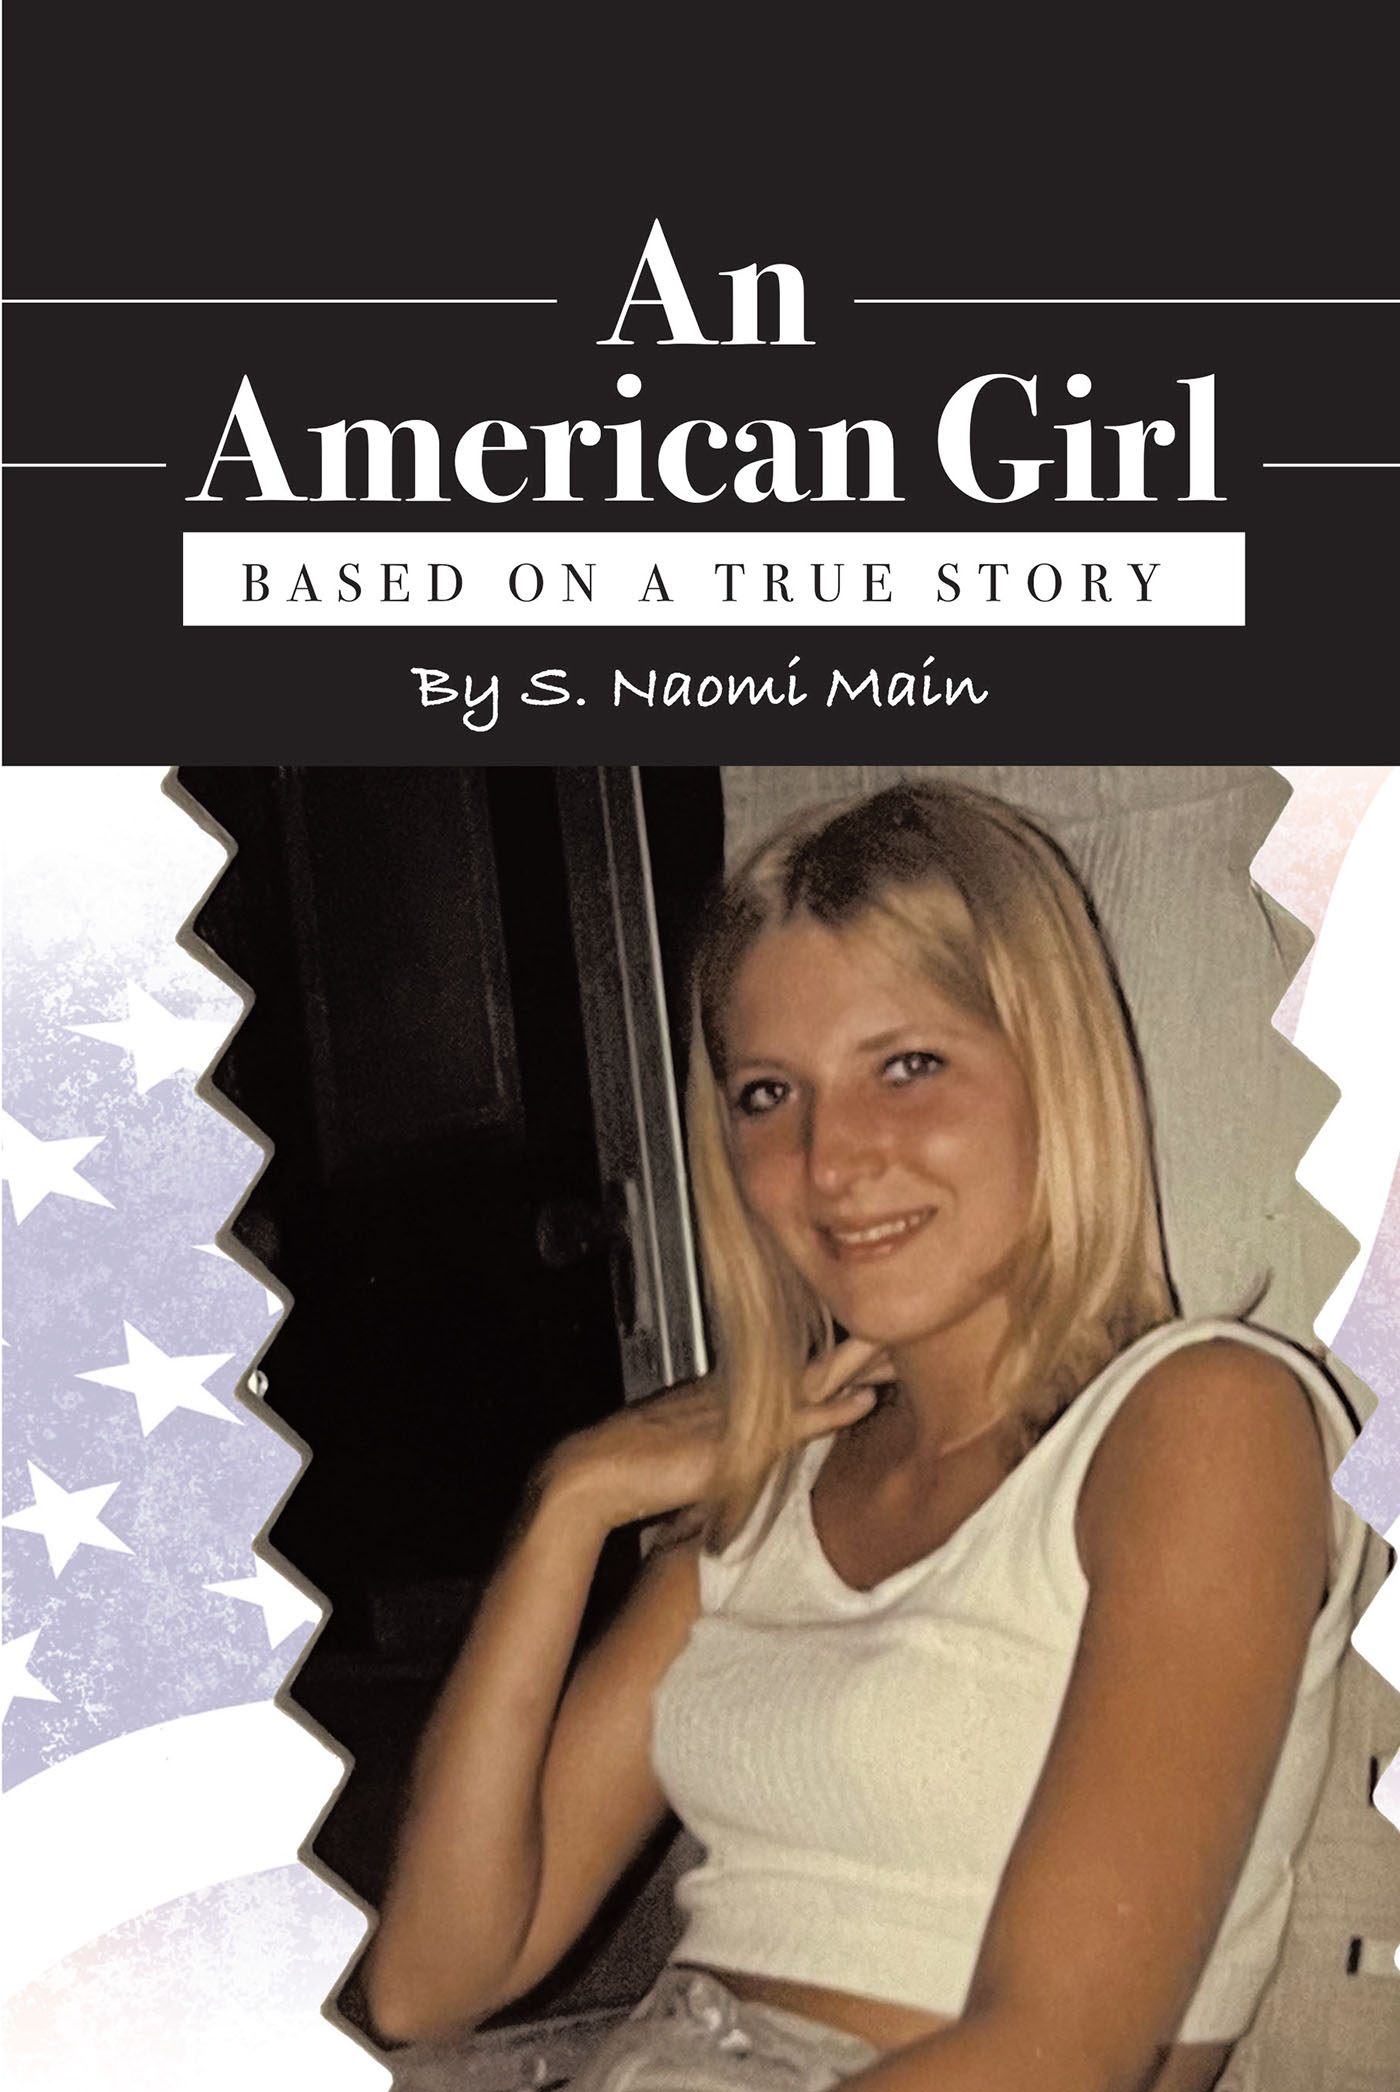 An American Girl Book Cover